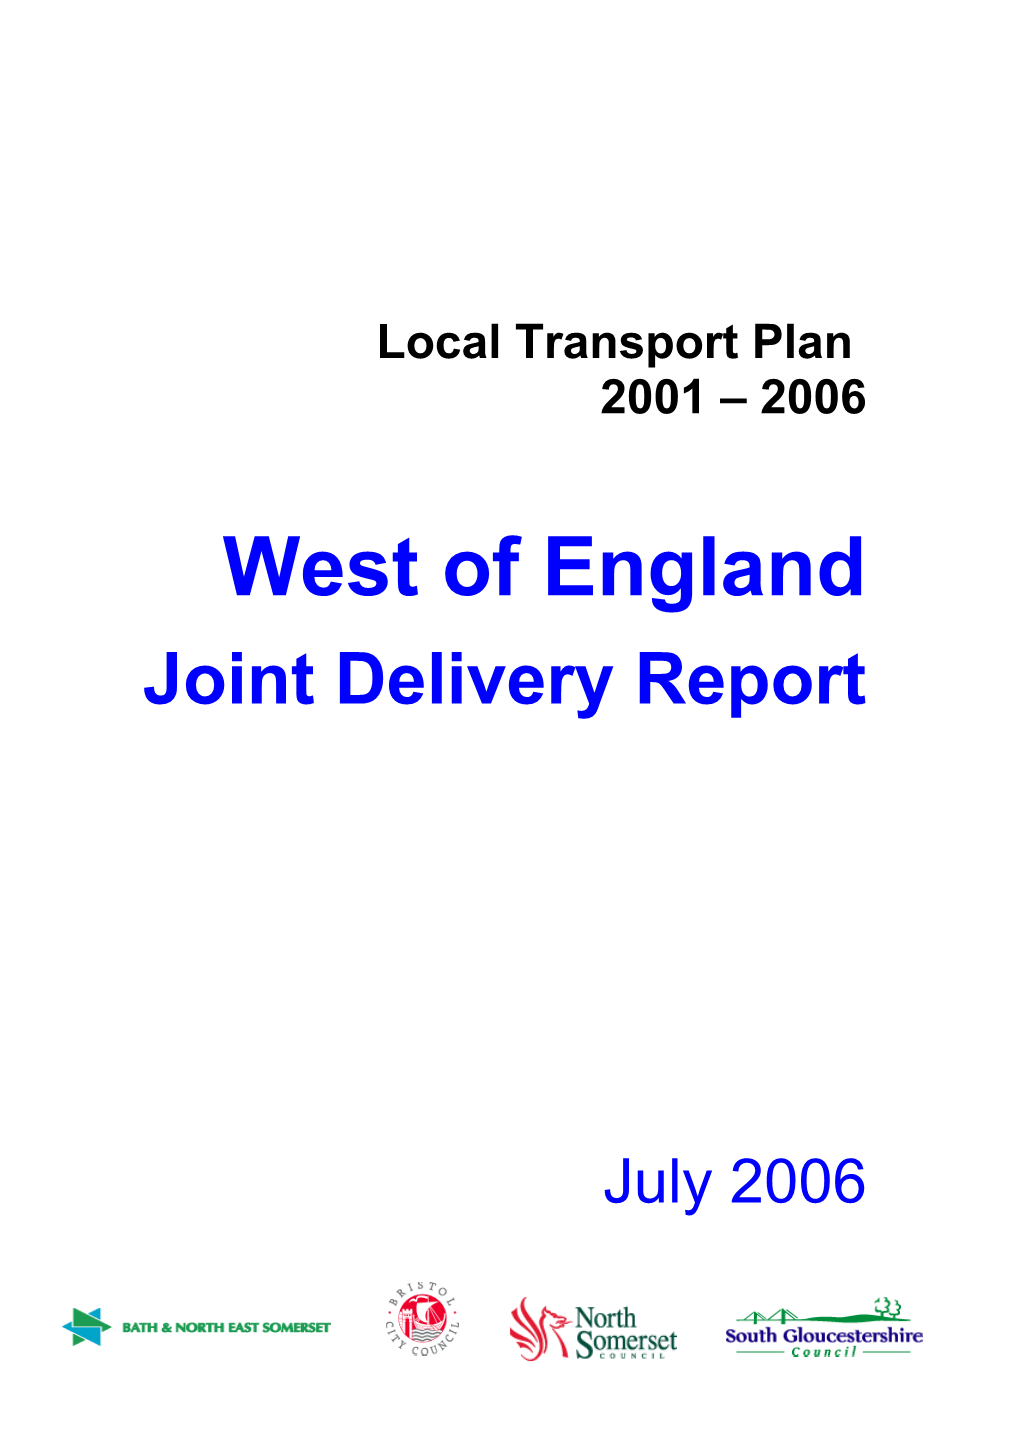 Joint Delivery Report - Final Version 060707